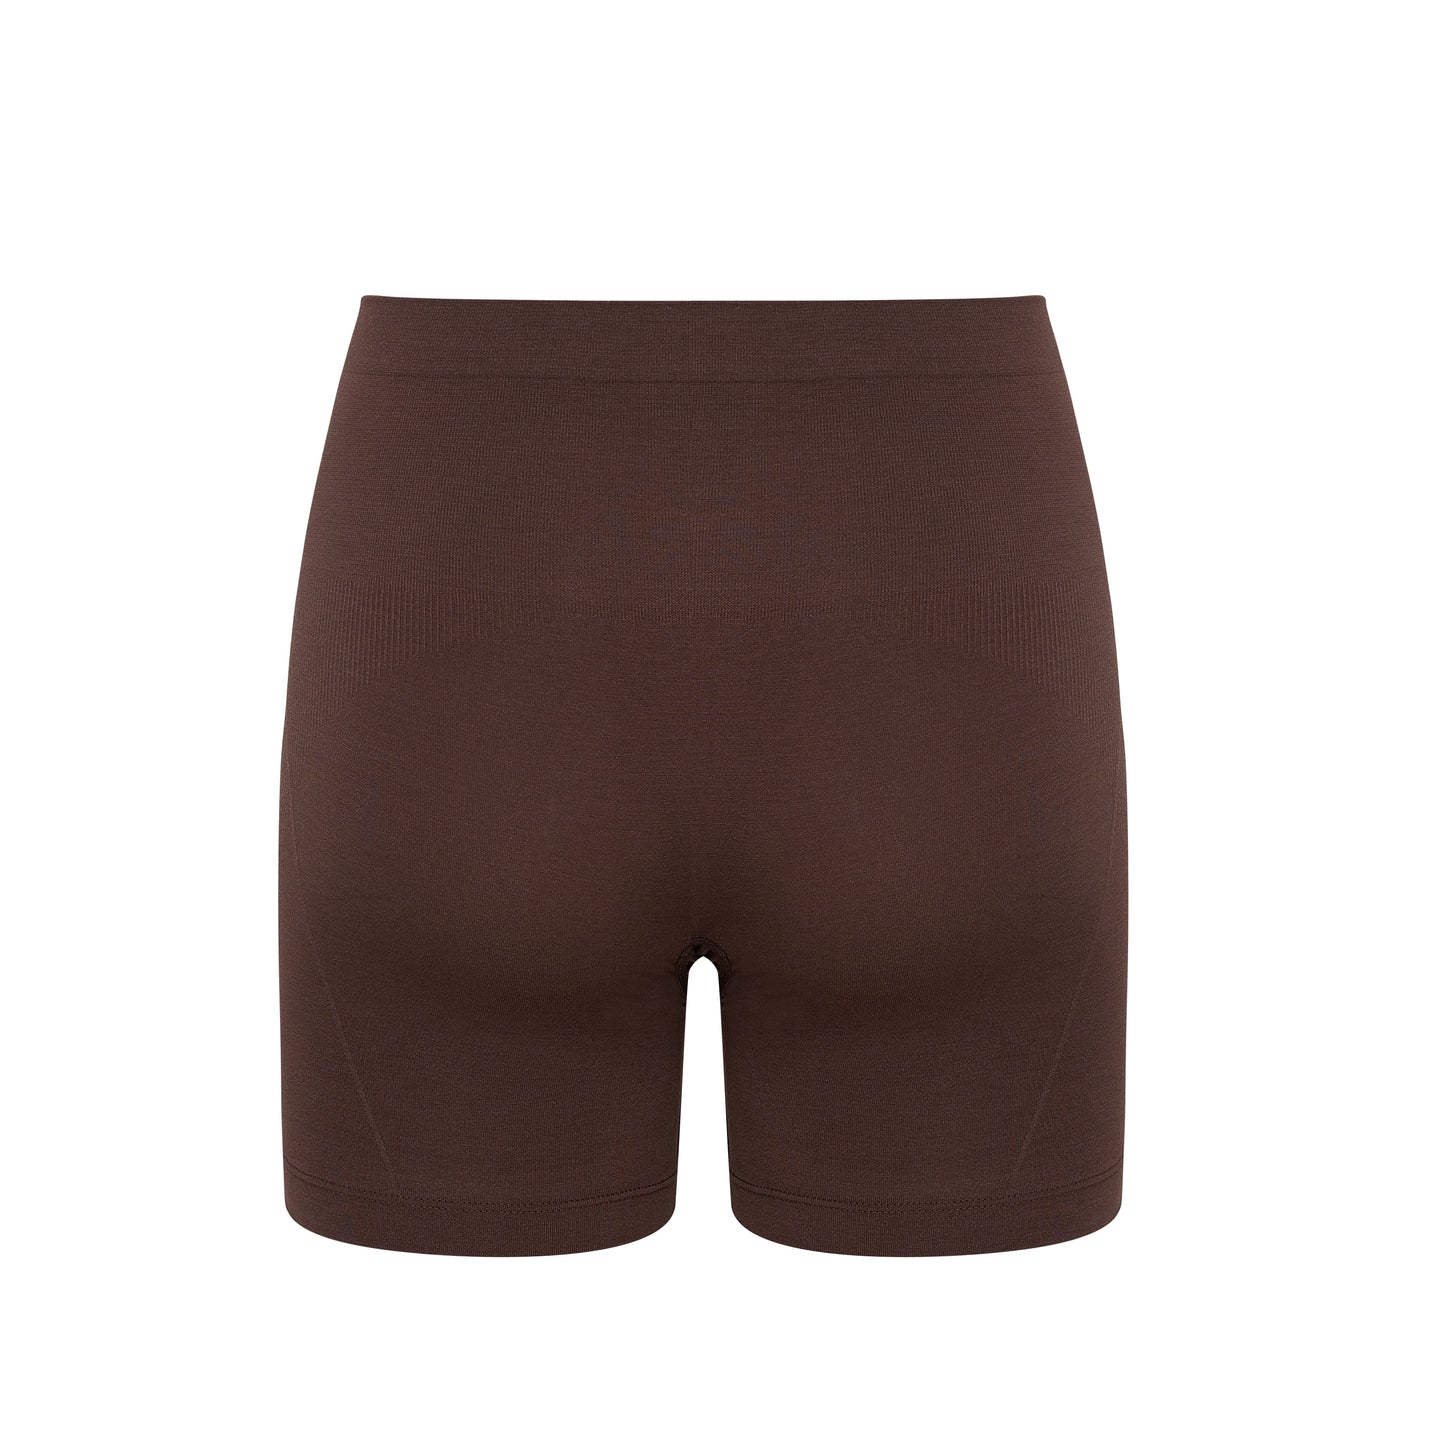 flat lay image of brown shorts from back